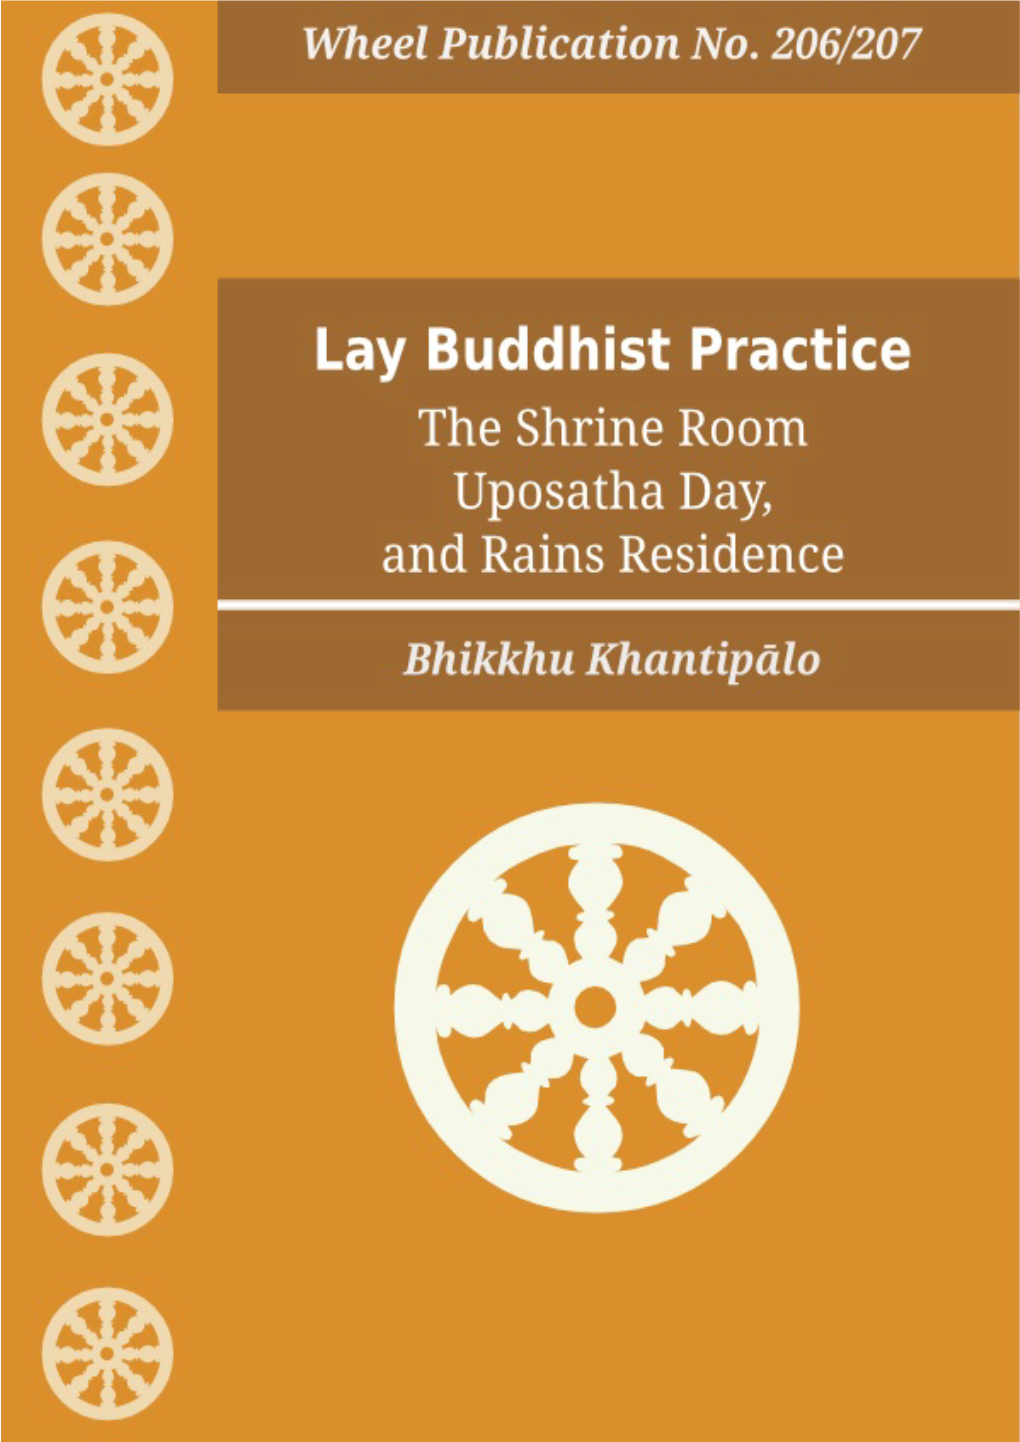 Wh 206/207. Lay Buddhist Practice